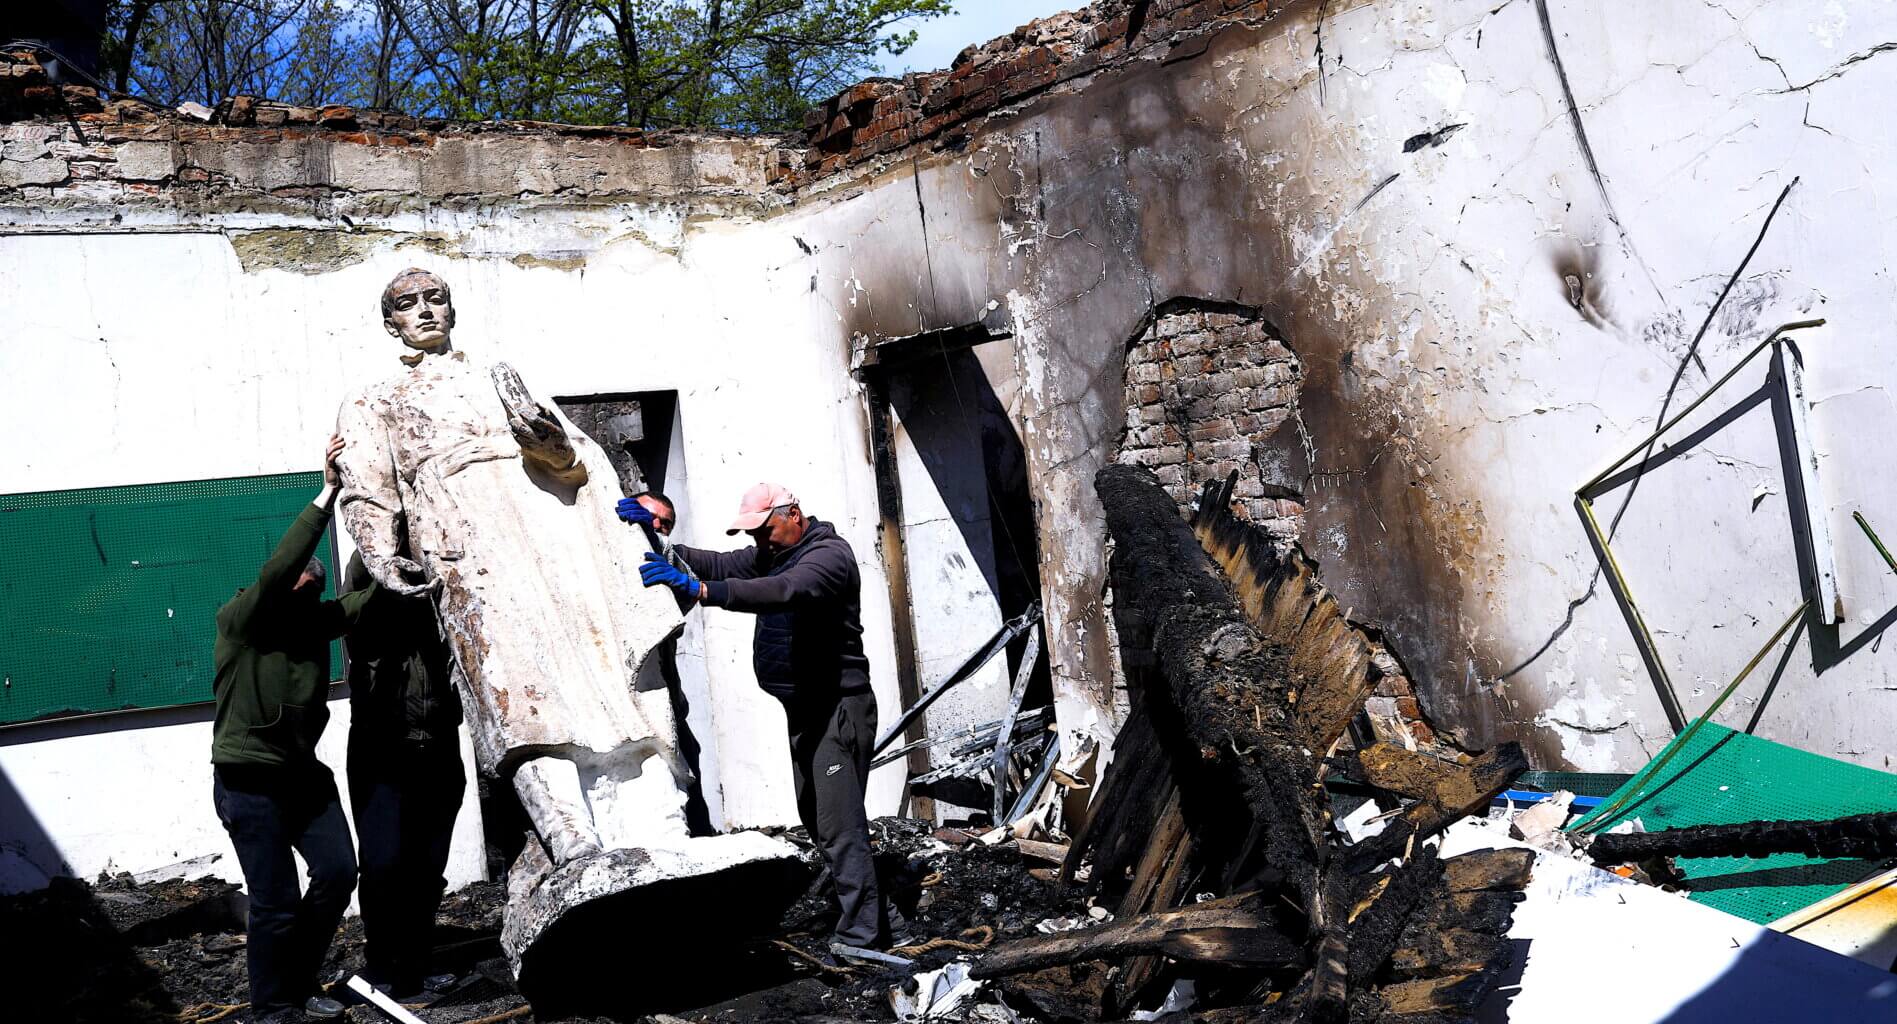 Hryhorii Skovoroda Literary Memorial Museum was destroyed by Russian forces